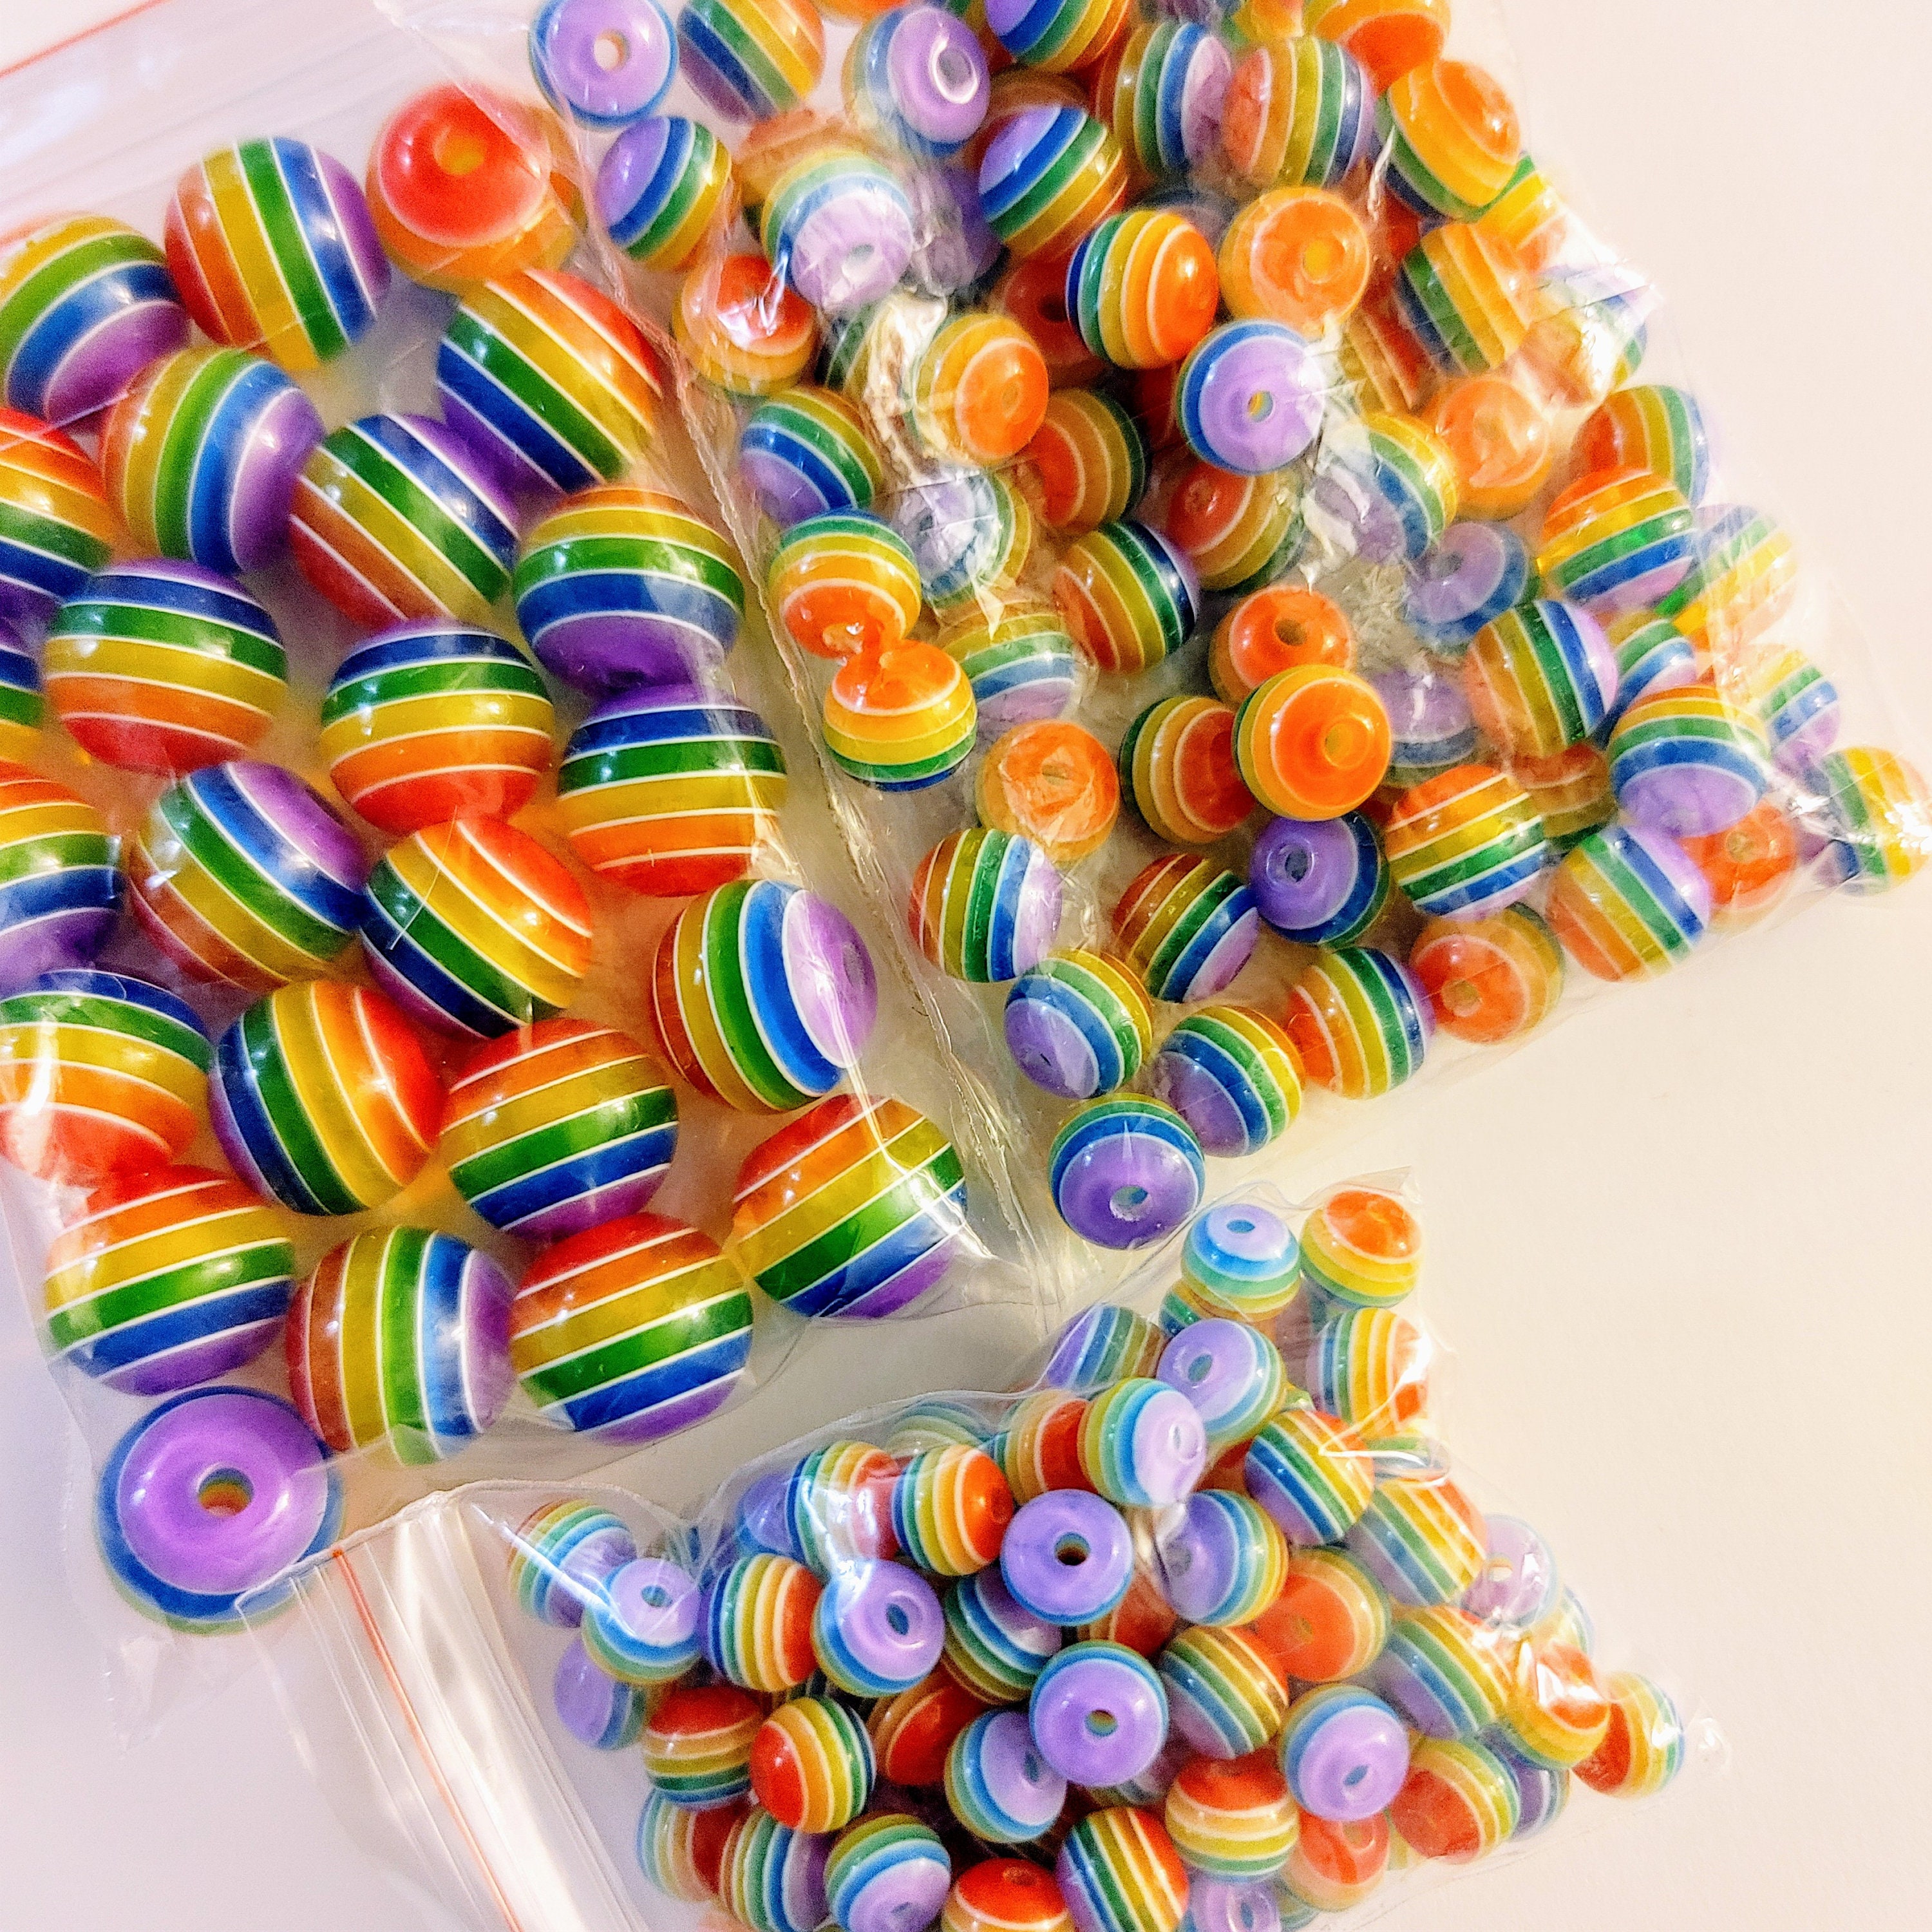 20-30pcs Rainbow Beads Round Stripe Mixed Color Resin DIY For Making  Jewelry Bracelet Necklace Earrings